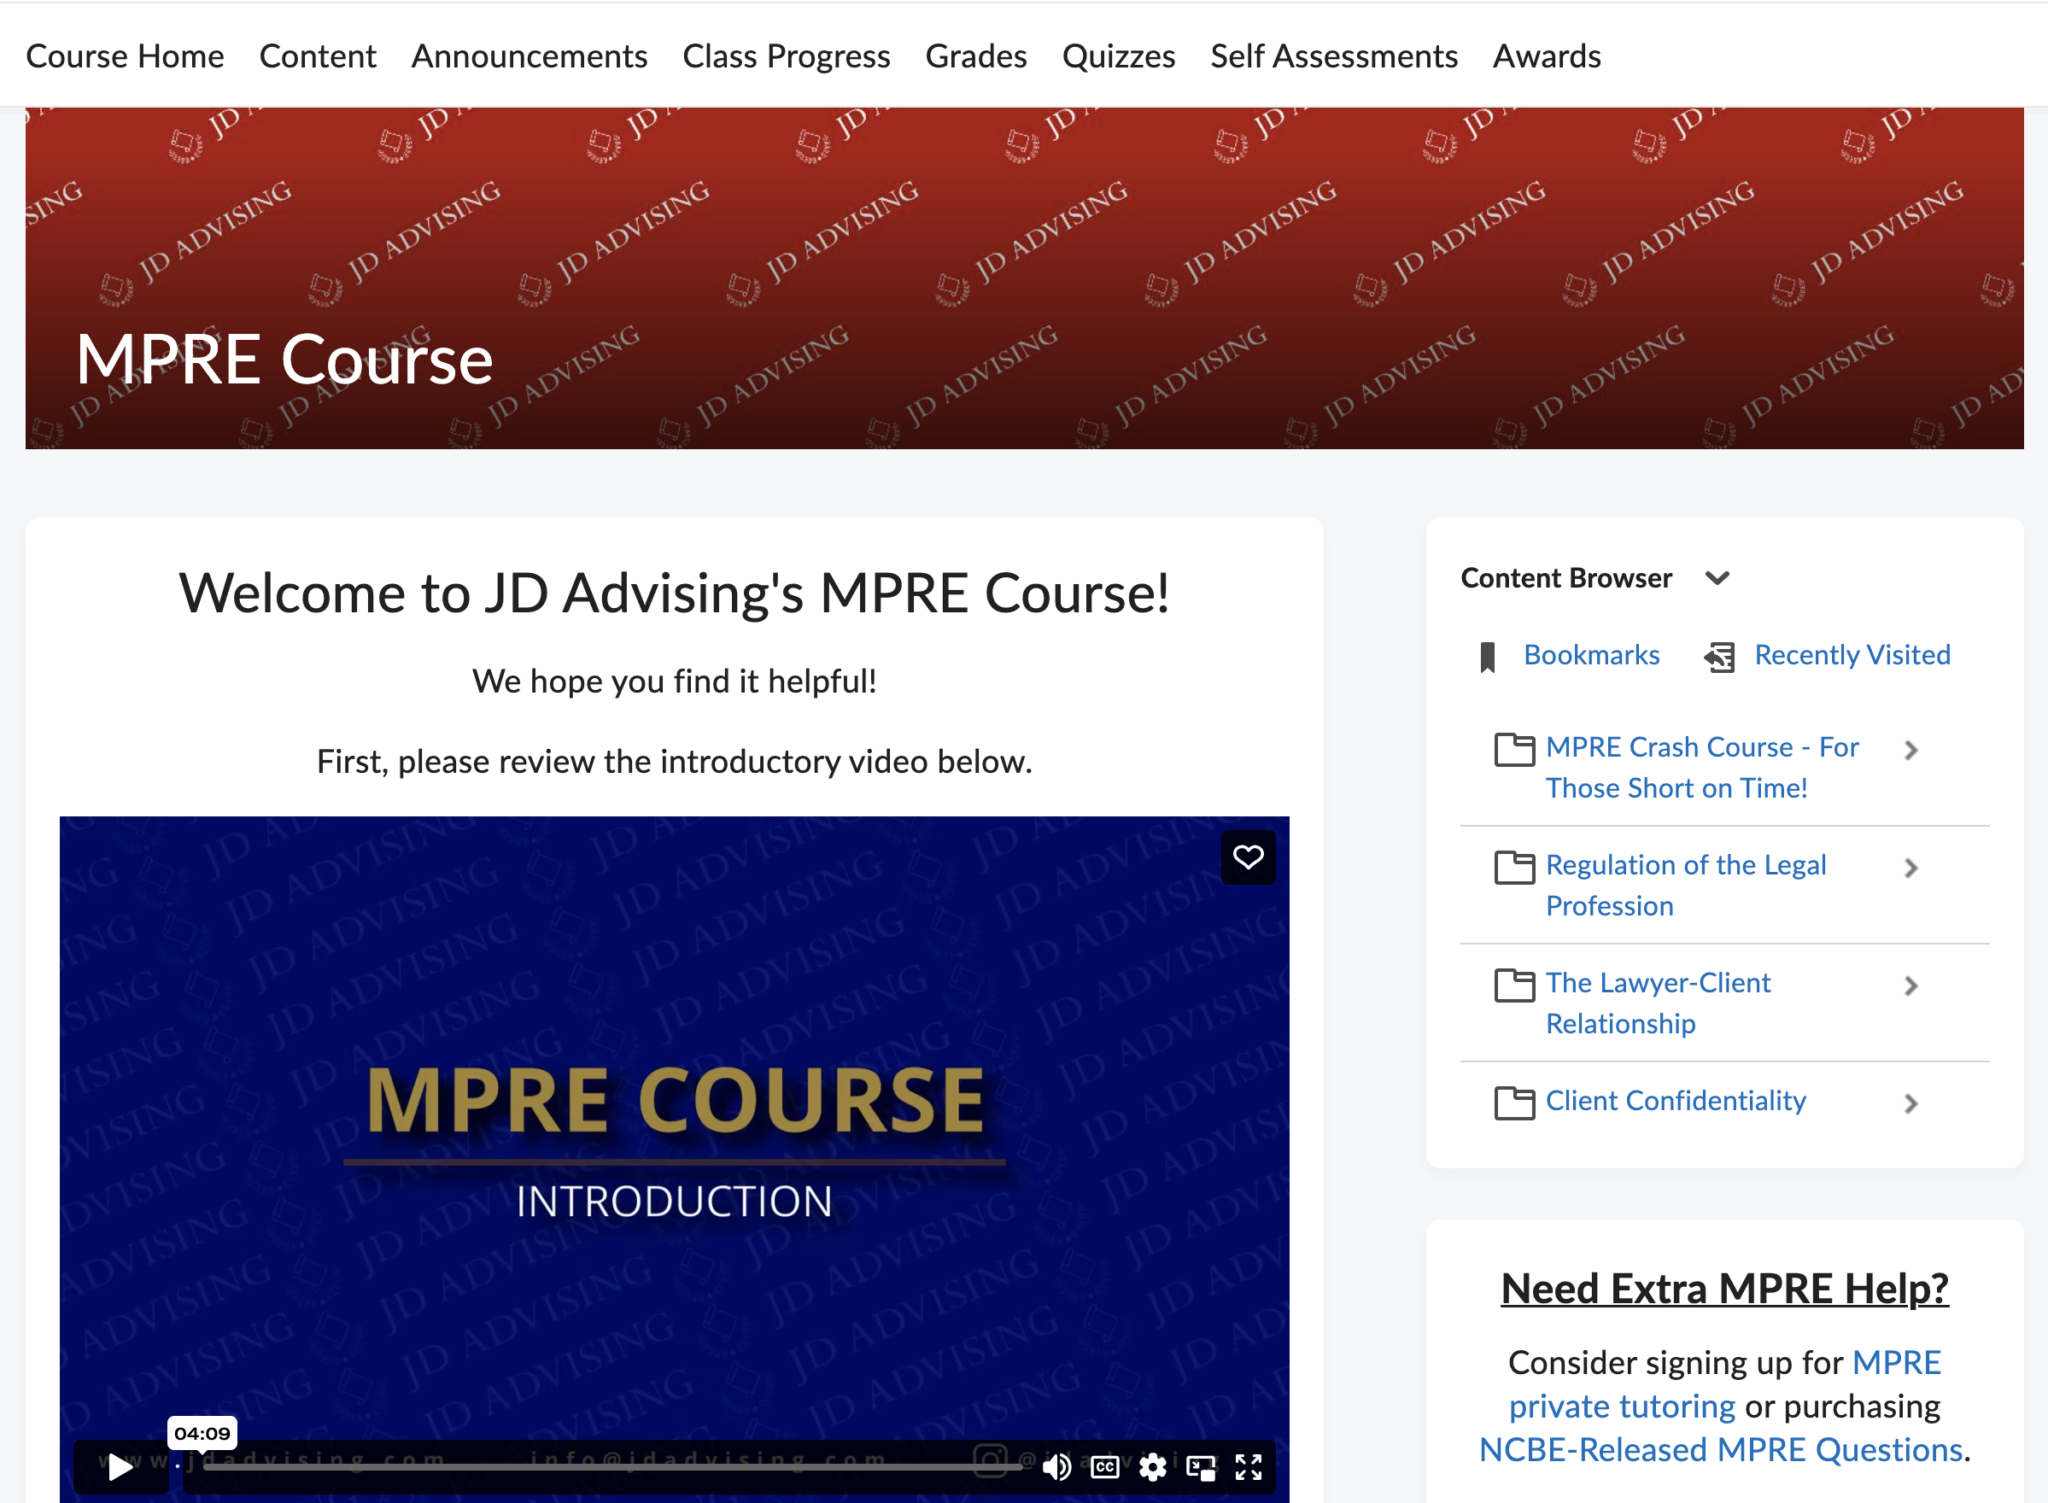 Put off studying for the MPRE? Sign up for our free MPRE course! JD